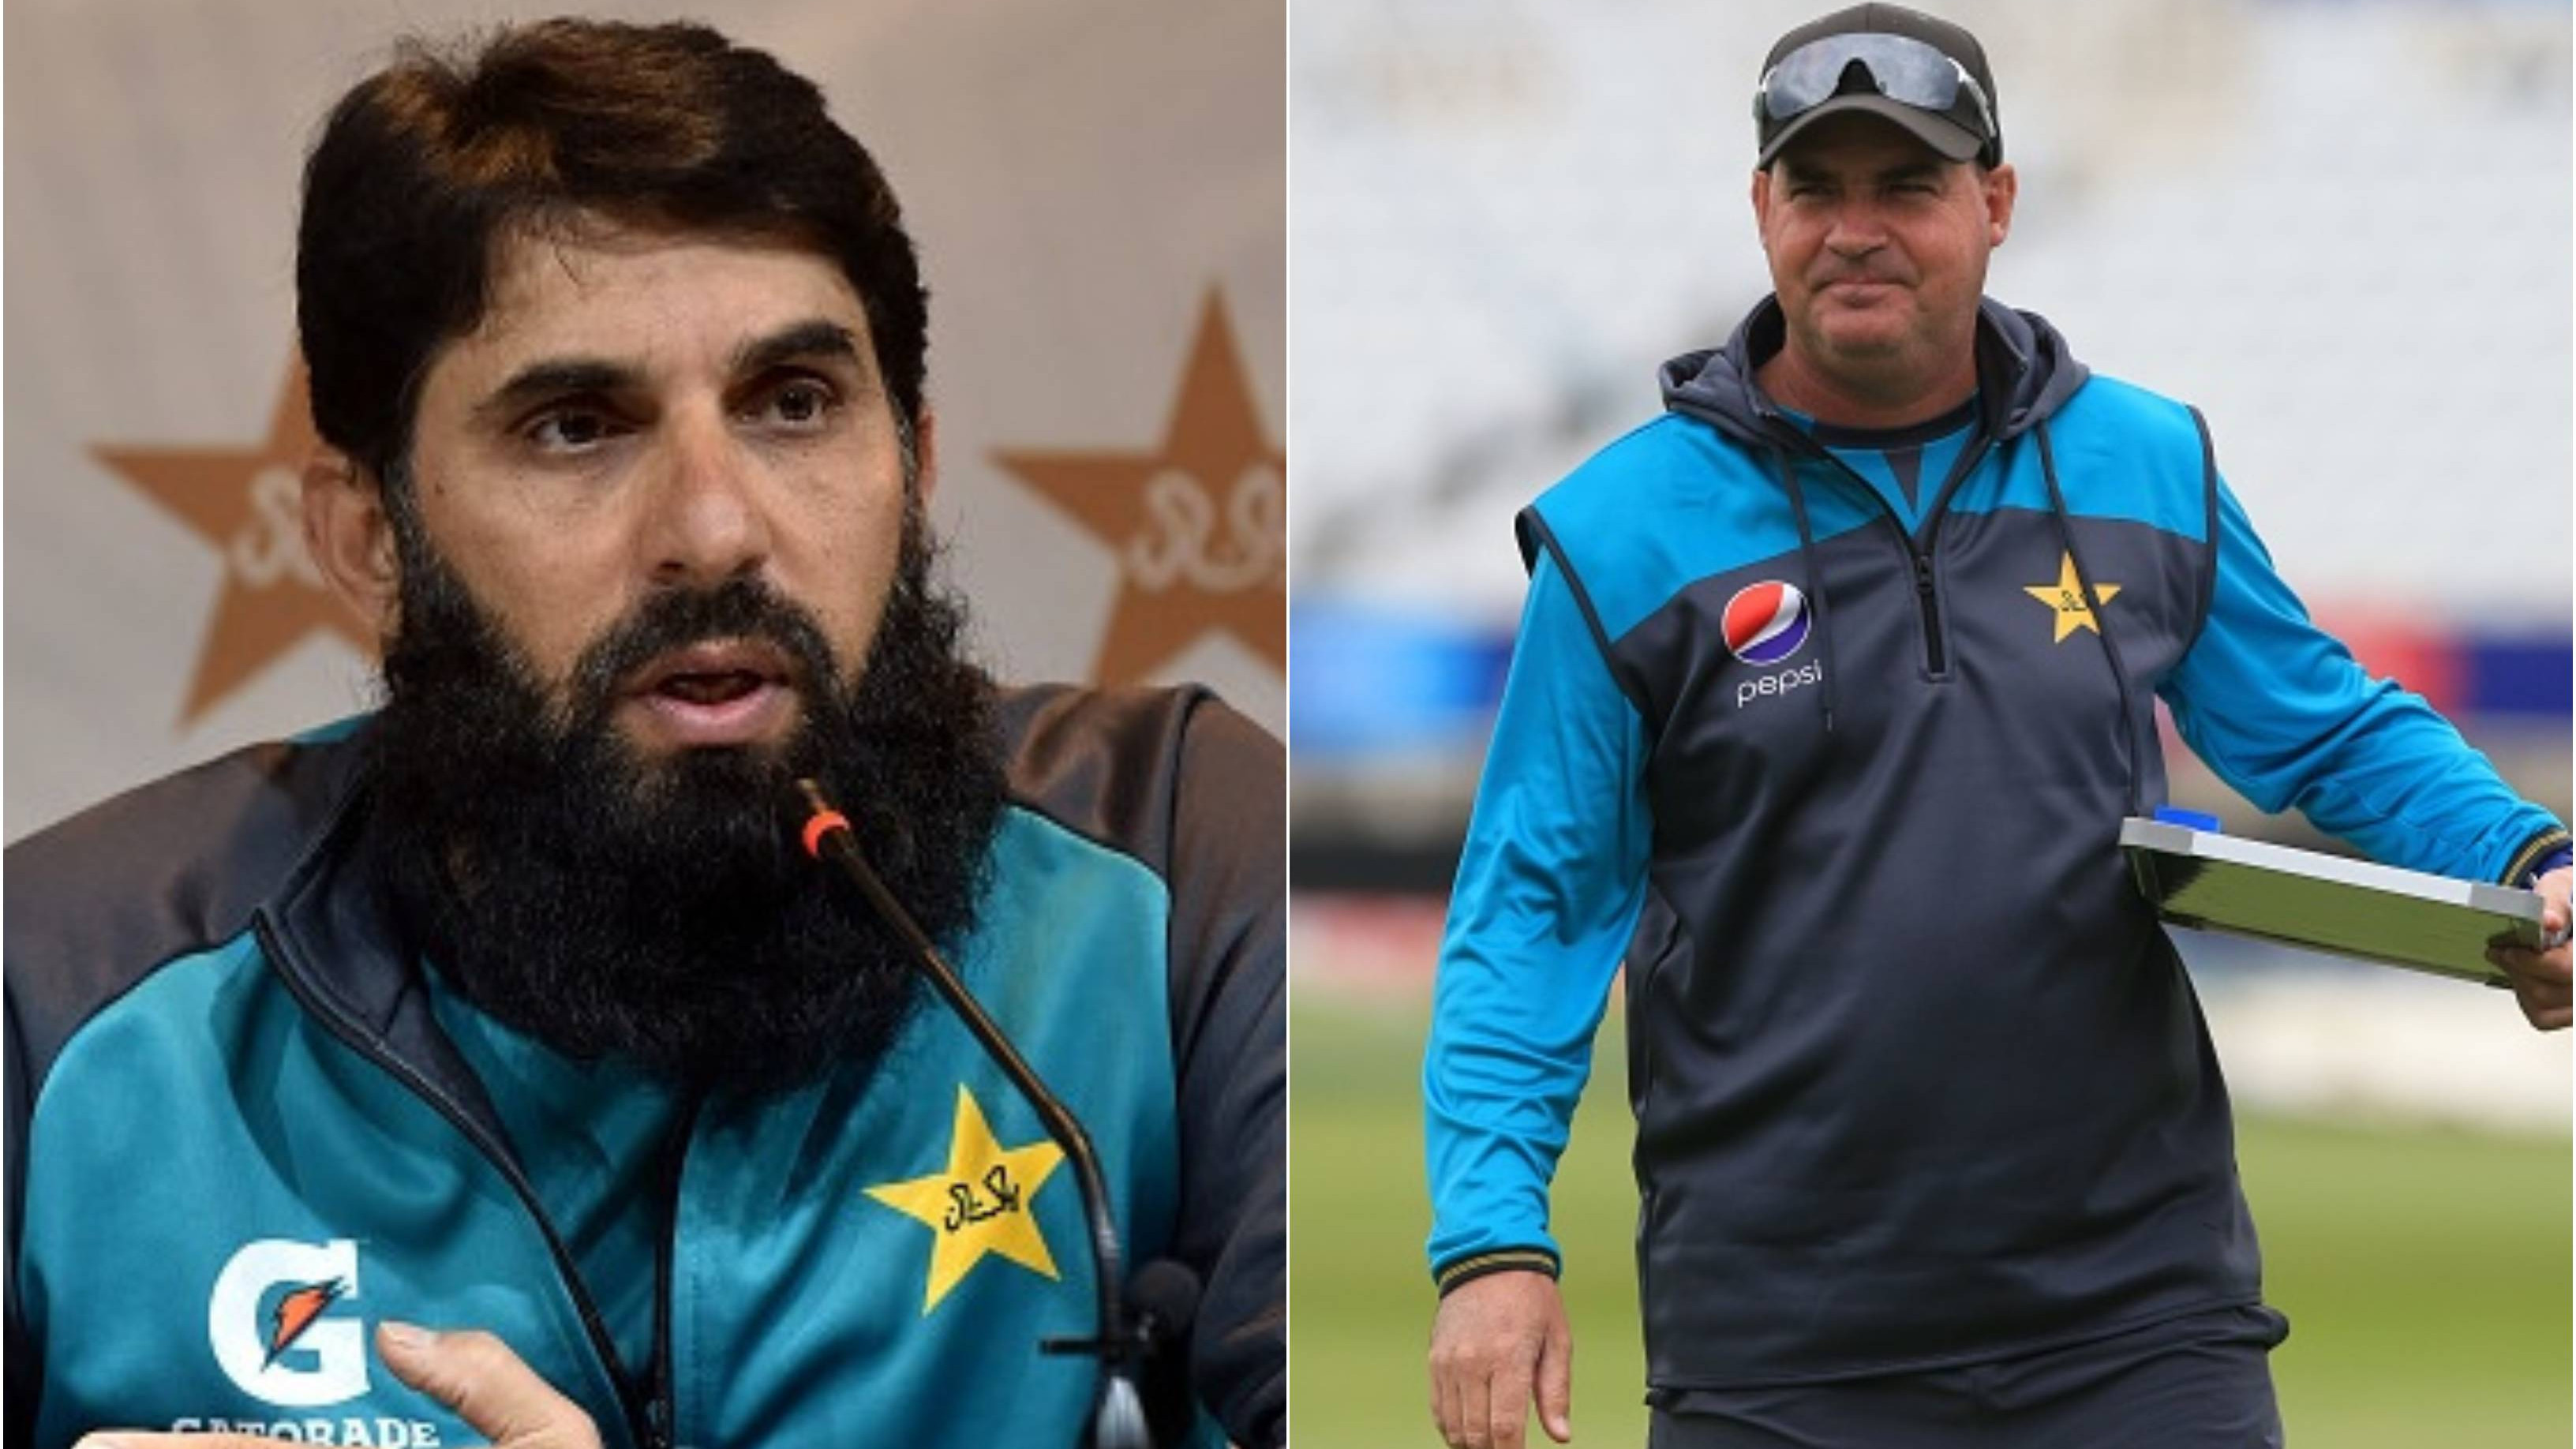 “It is a slap on our cricket system,” Misbah-ul-Haq reacts to Mickey Arthur's potential return with Pakistan team